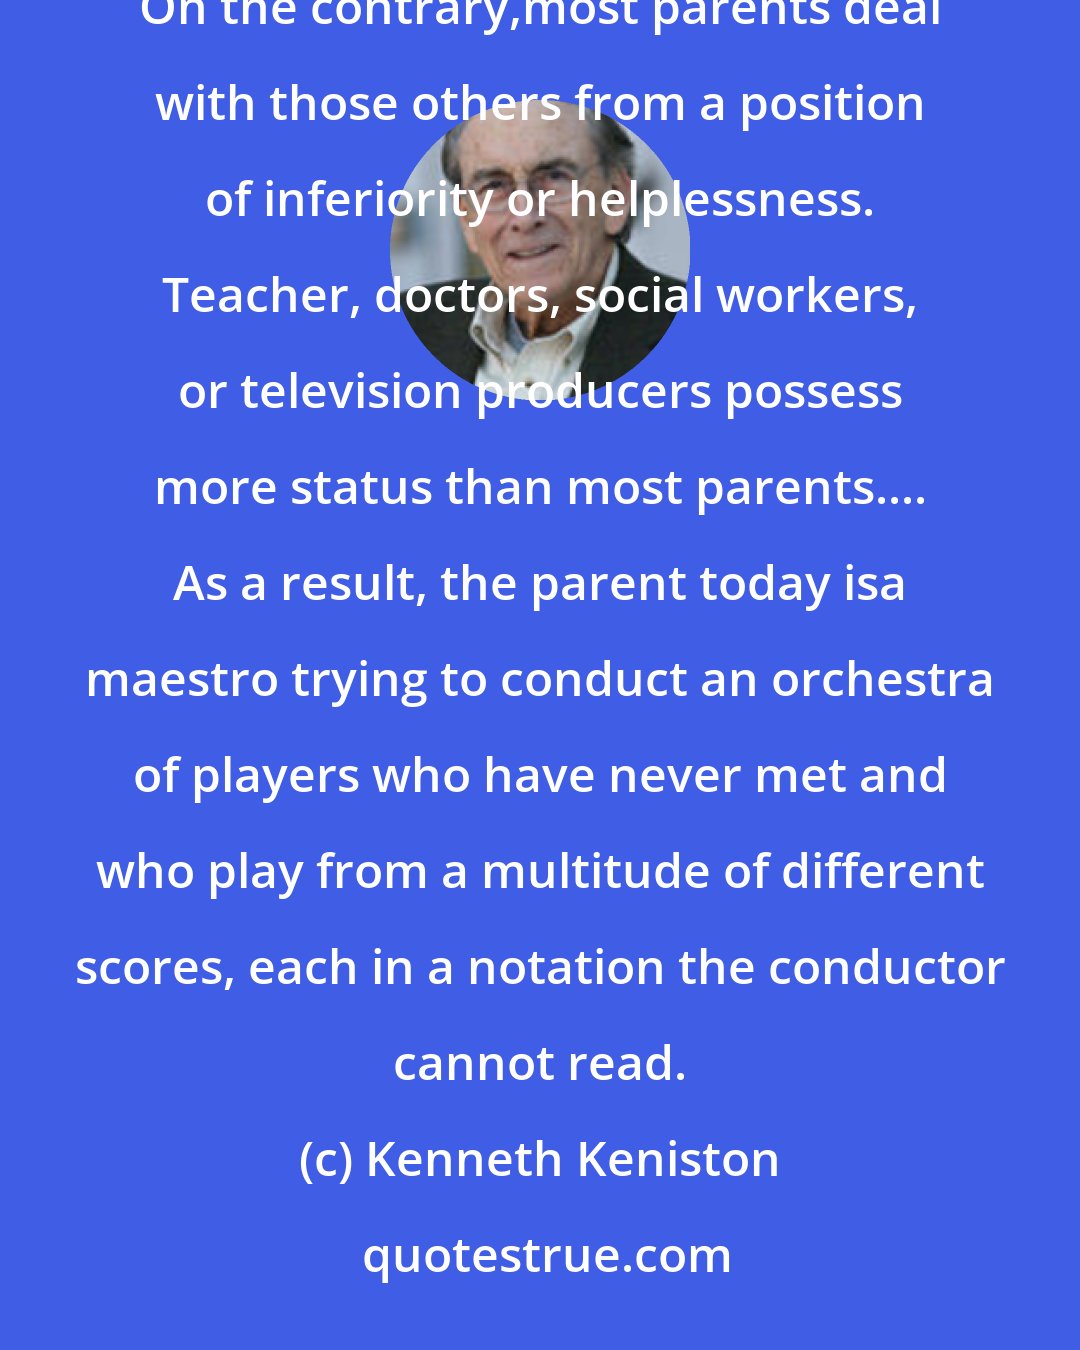 Kenneth Keniston: Today's parents have little authority over those others with whom they share the task of raising their children. On the contrary,most parents deal with those others from a position of inferiority or helplessness. Teacher, doctors, social workers, or television producers possess more status than most parents.... As a result, the parent today isa maestro trying to conduct an orchestra of players who have never met and who play from a multitude of different scores, each in a notation the conductor cannot read.